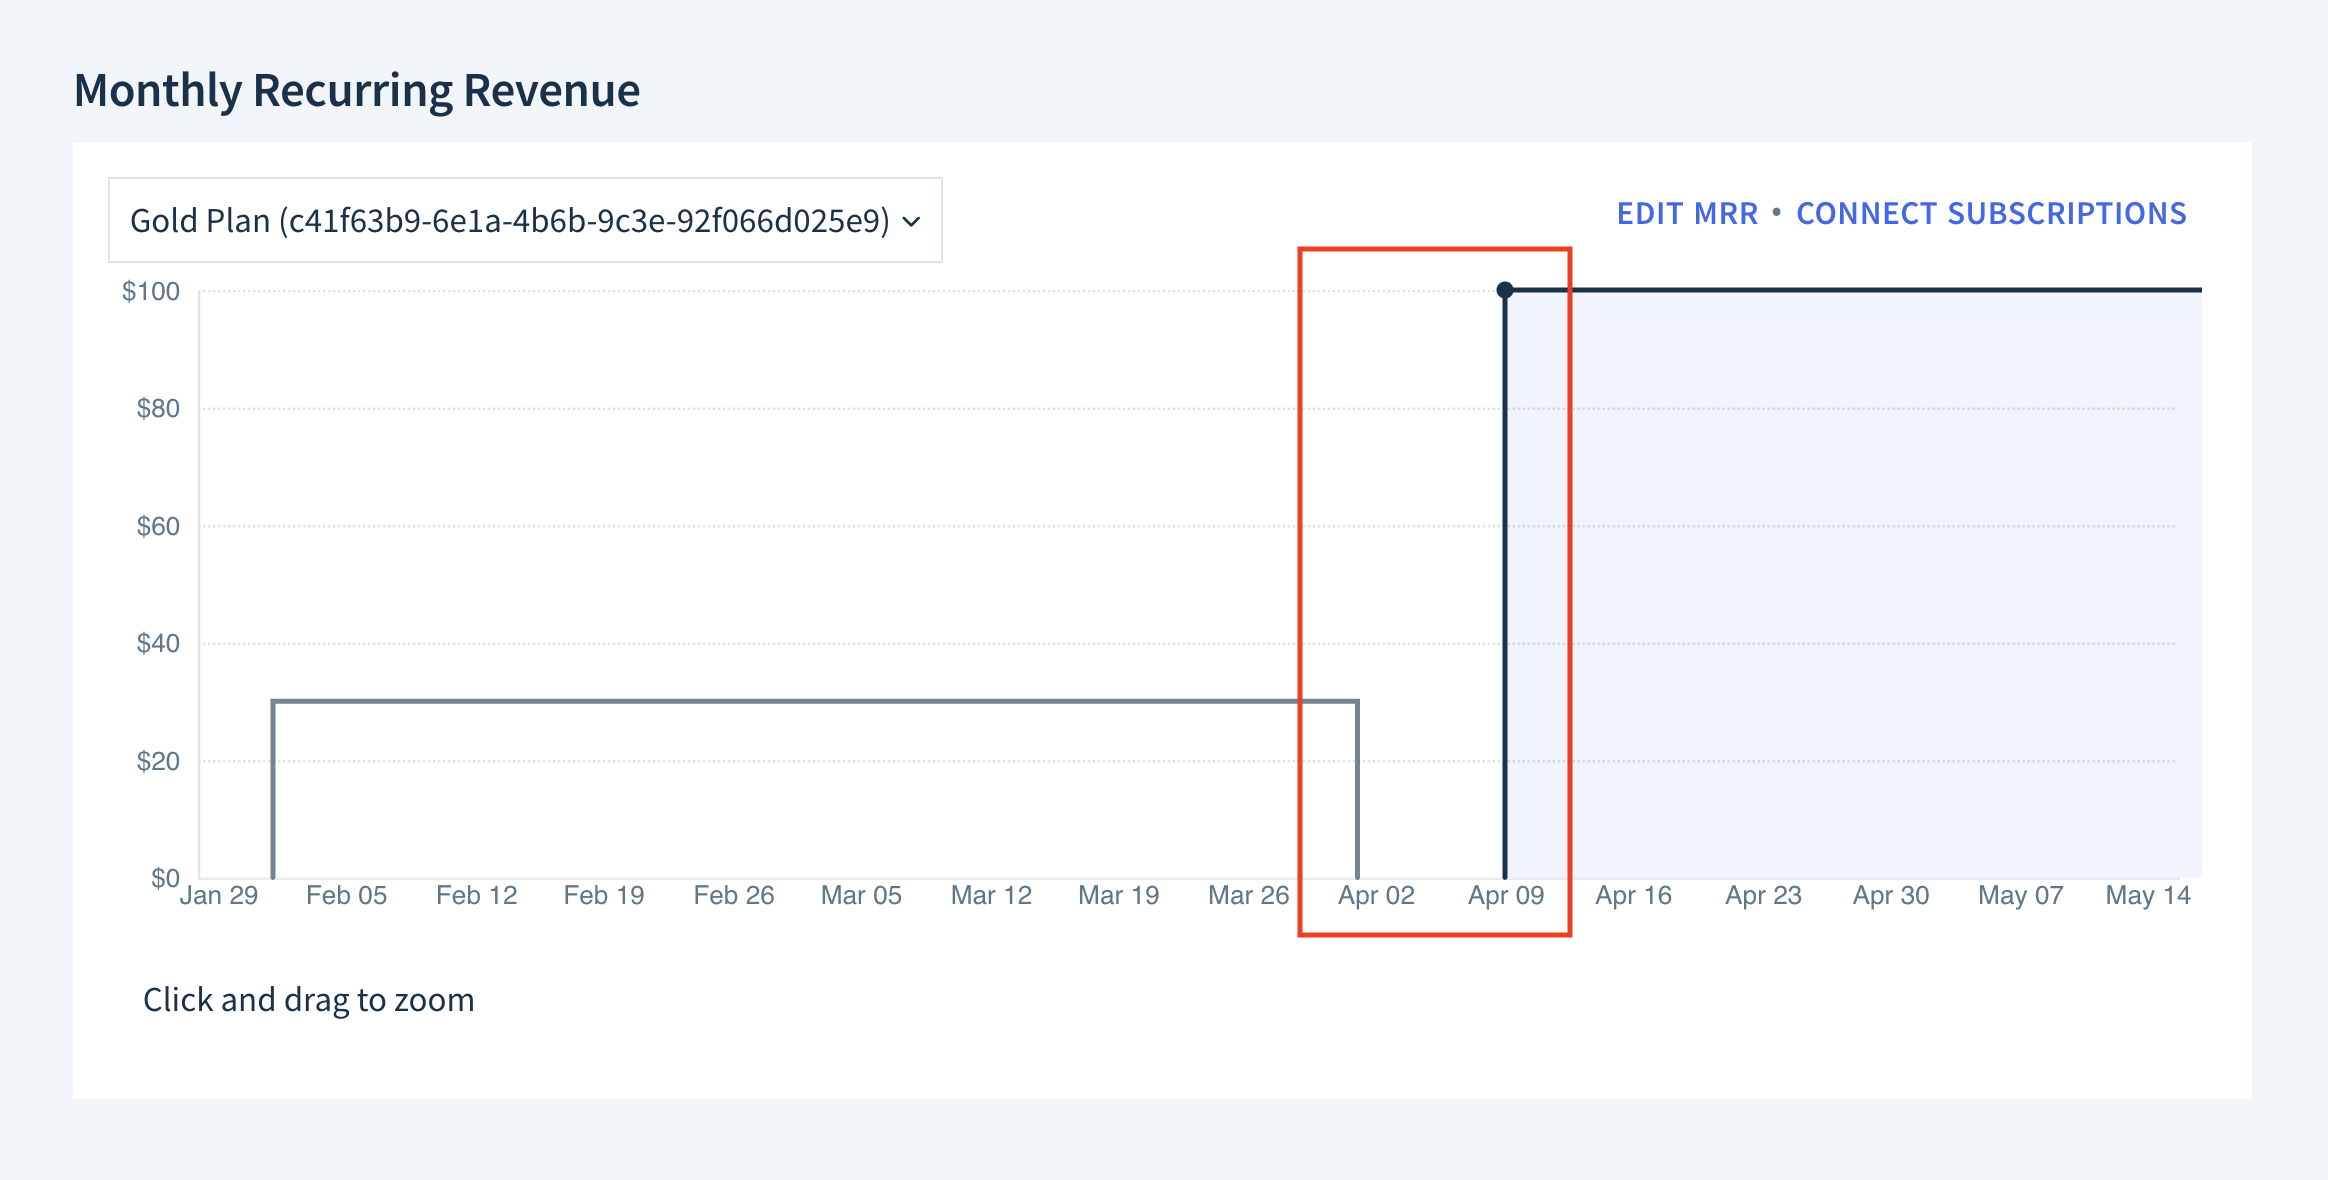 Screenshot of the Monthly Recurring Revenue graph showing two subscriptions. One subscription starts at the beginning of February and ends on April 2nd. This subscription has an MRR of 30 dollars throughout its course. There’s a gap between the end of this subscription and the start of the second subscription, which begins on April 9th and is still active. The second subscription has an MRR of 100 dollars throughout its course.